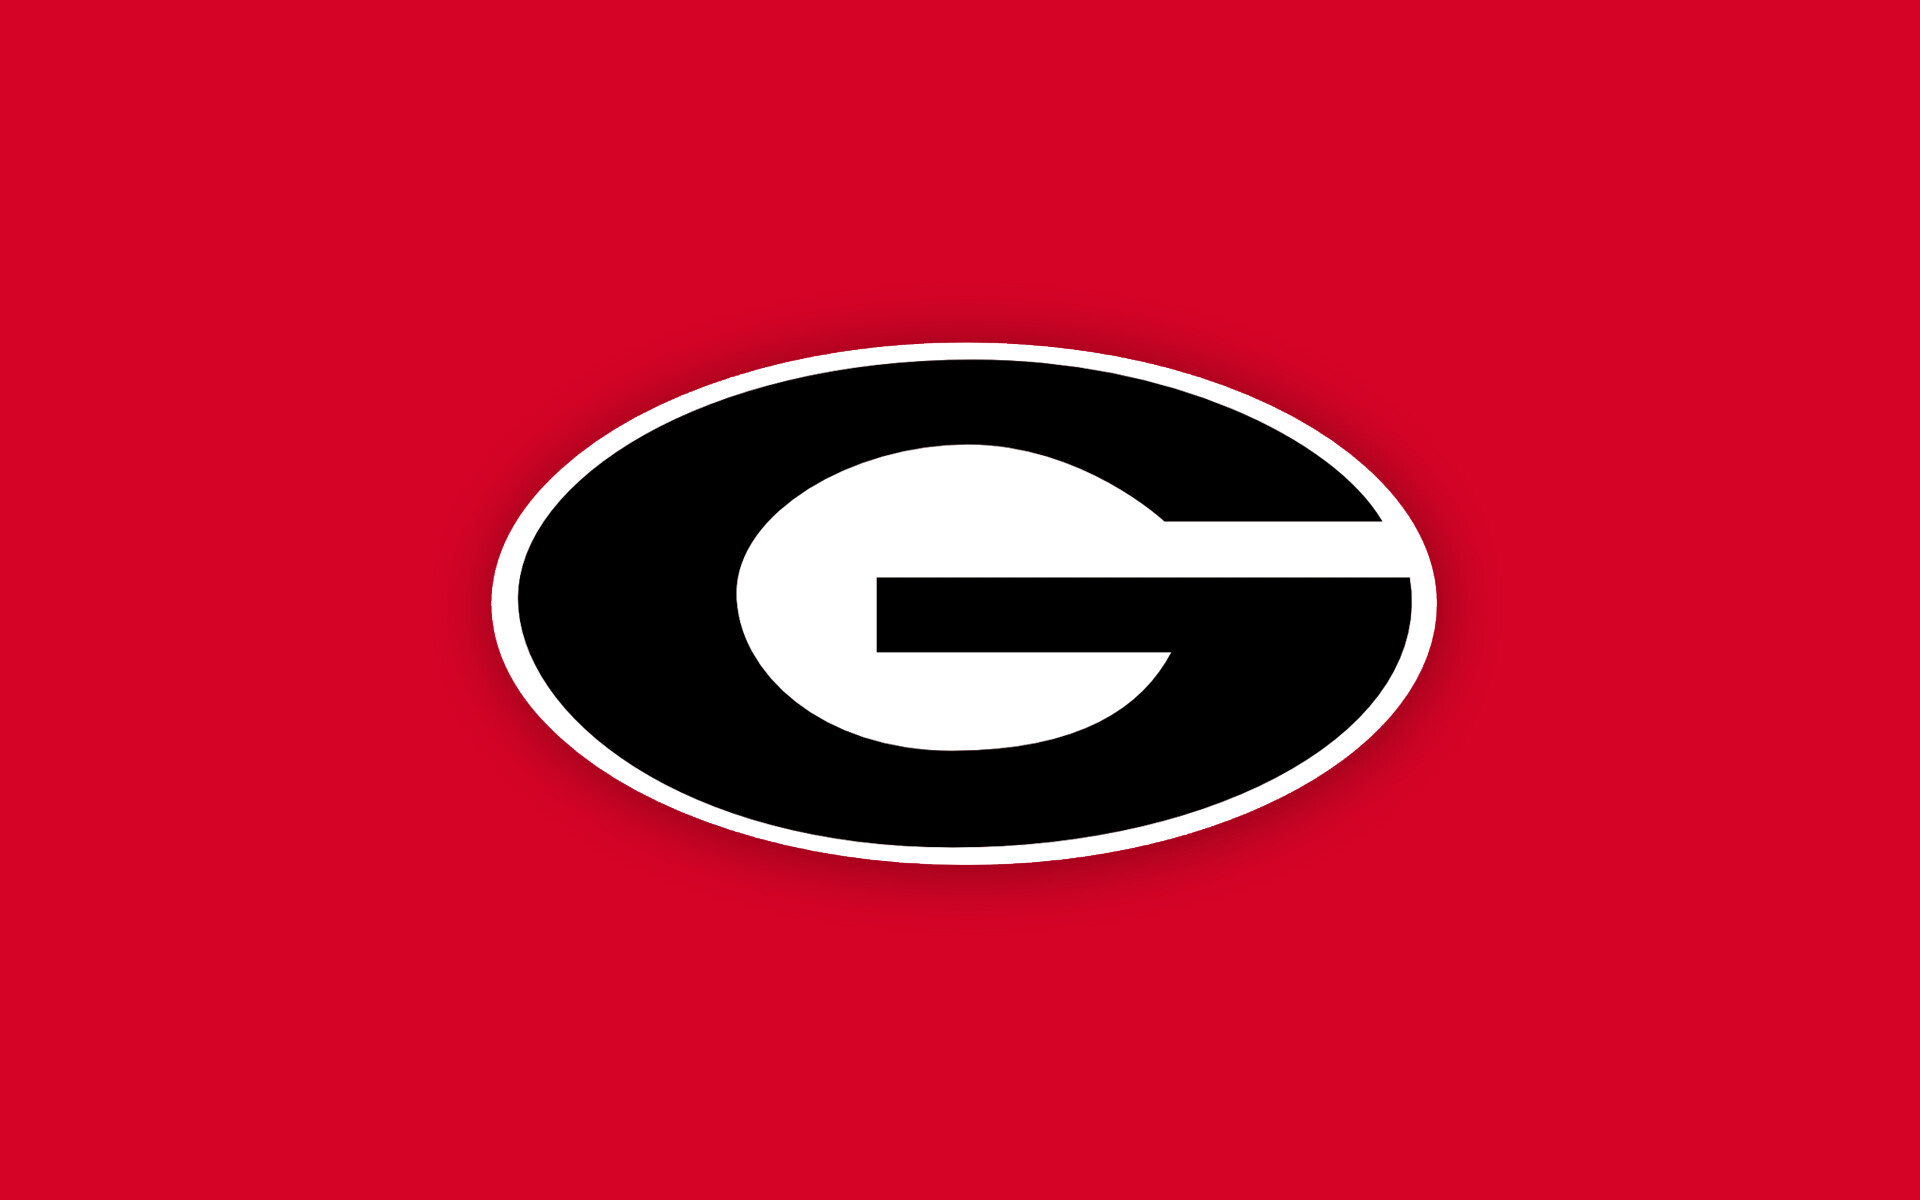 Georgia Bulldogs: UGA Football, The team that compete in the Football Bowl Subdivision. 1920x1200 HD Wallpaper.